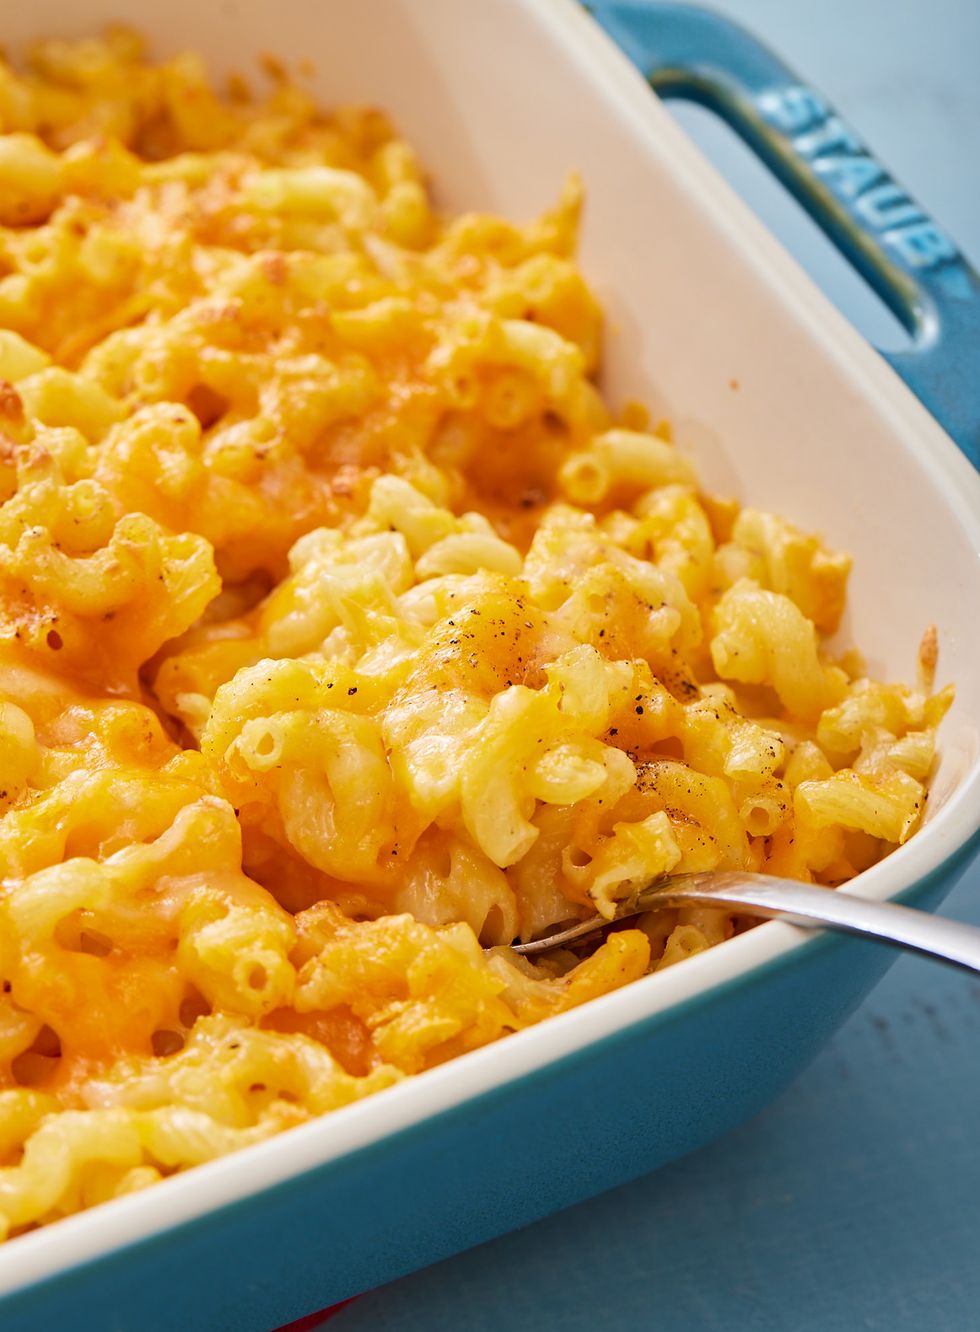 https://hips.hearstapps.com/hmg-prod/images/delish-210608-millie-peartree-mac-and-cheese-351-vertical-macro-v1-eb-1631547578.jpg?crop=1xw:1xh;center,top&resize=980:*